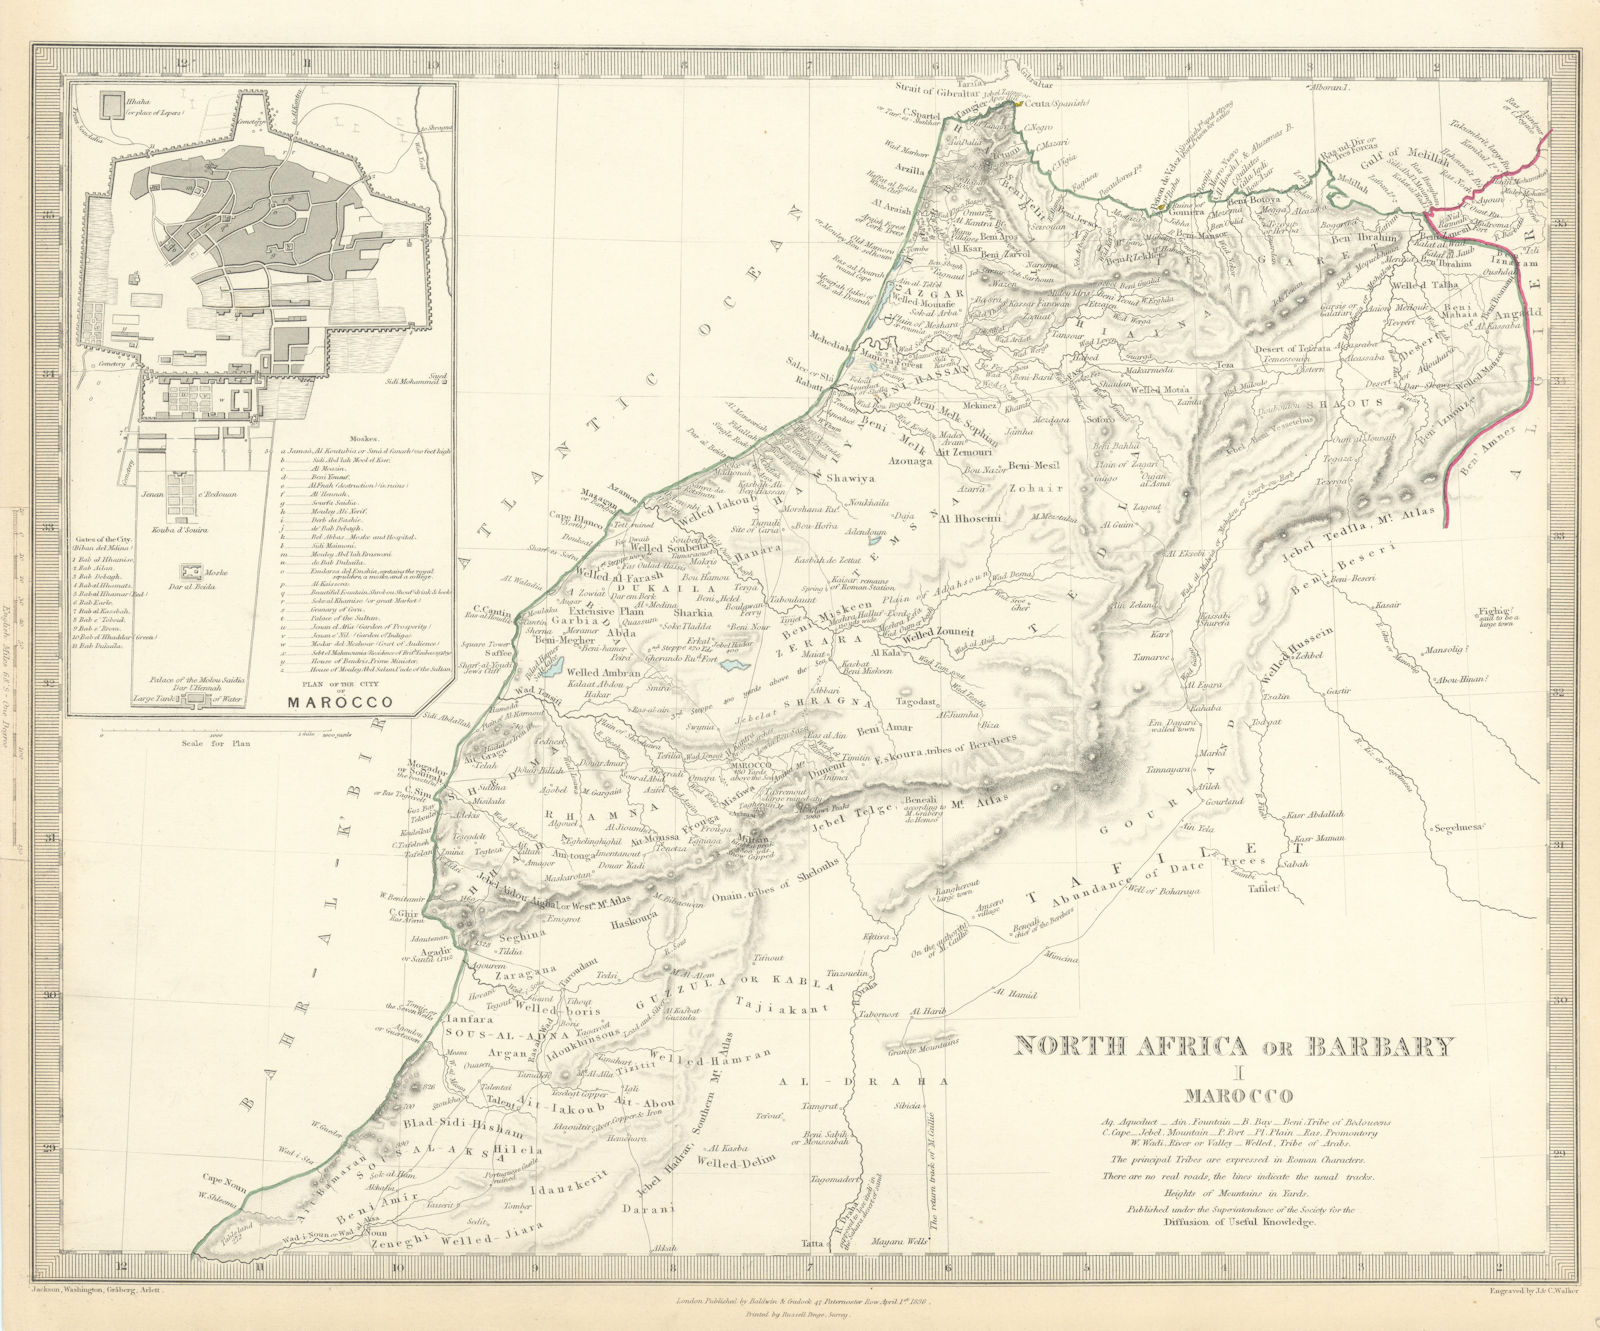 MOROCCO 'North Africa or Barbary' Marocco. Marrakech town plan. SDUK 1844 map